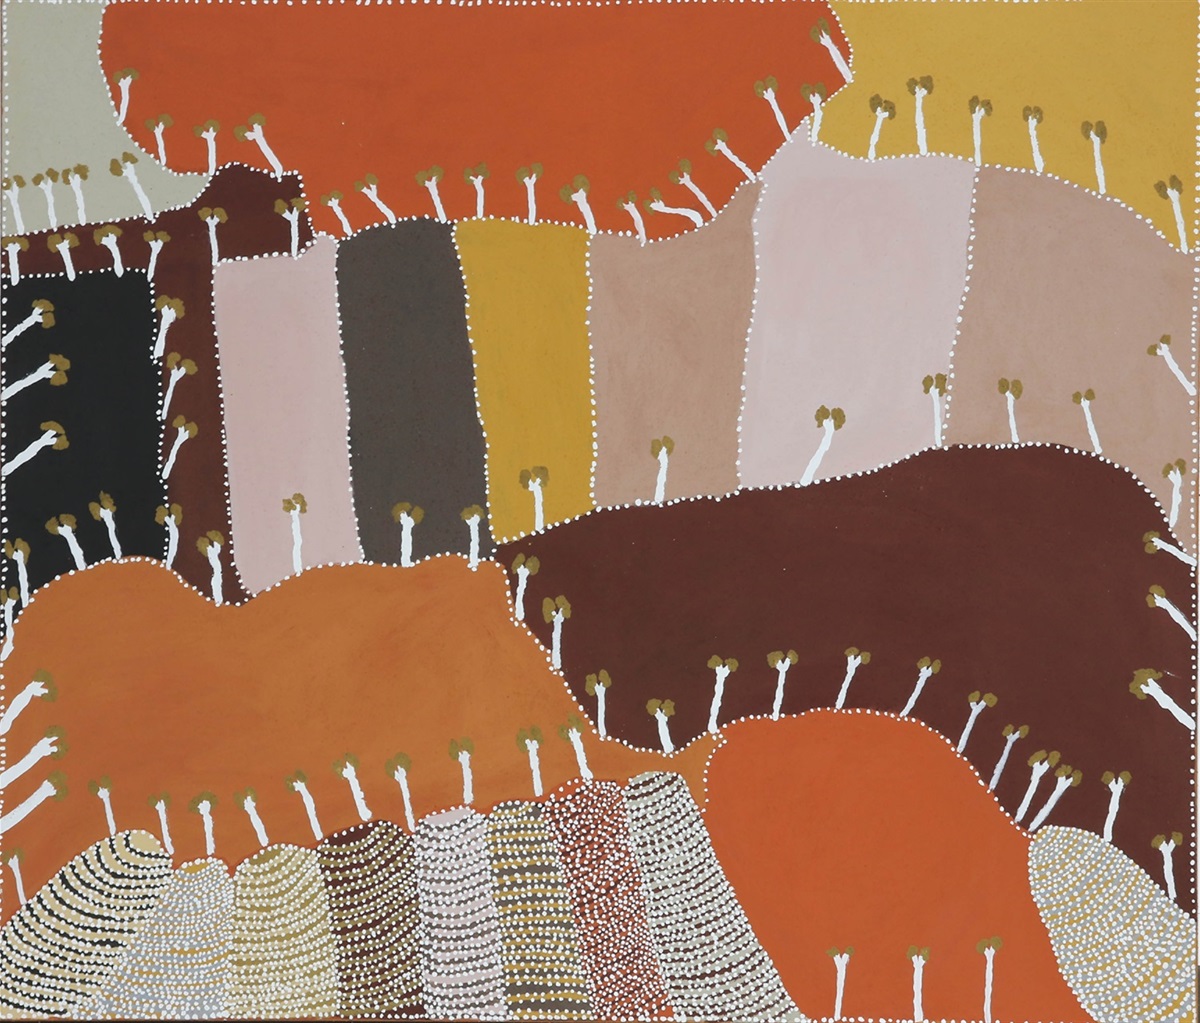 Patrick Mung Mung BOORNOOLOOLOO (Purnululu) Ochre and Natural pigments on linen, 2019